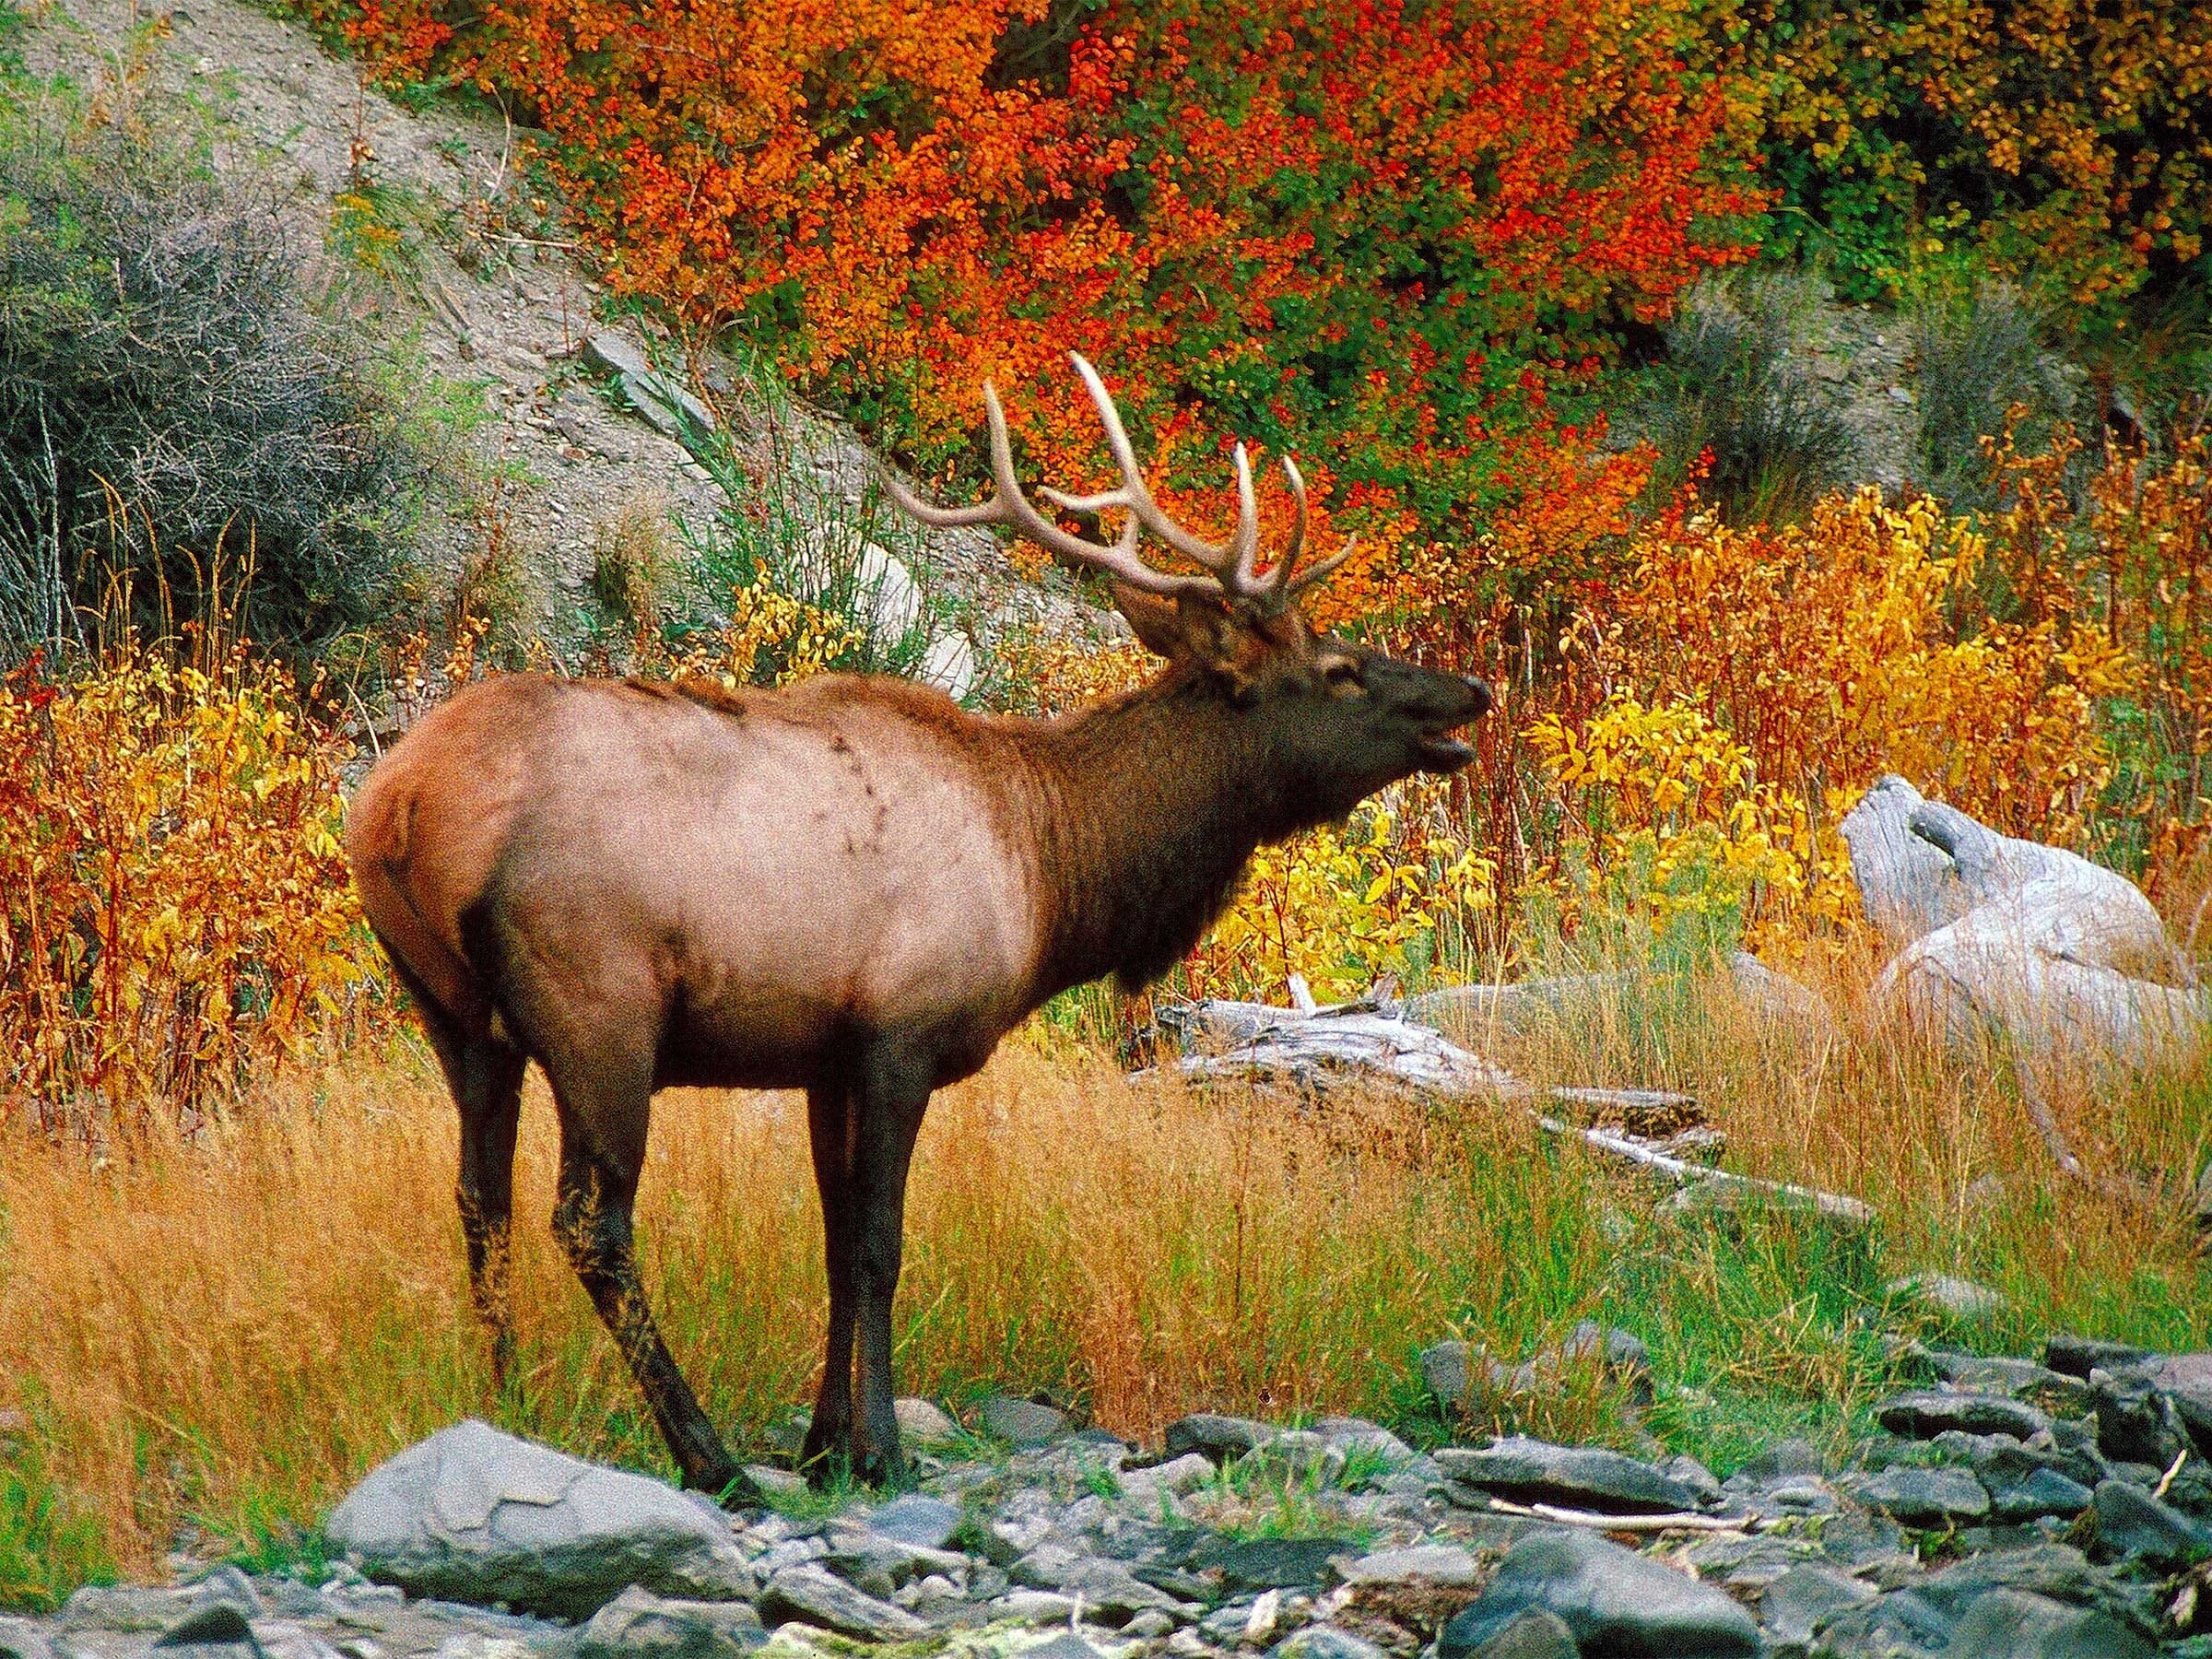 how many species of animals are in yellowstone national park